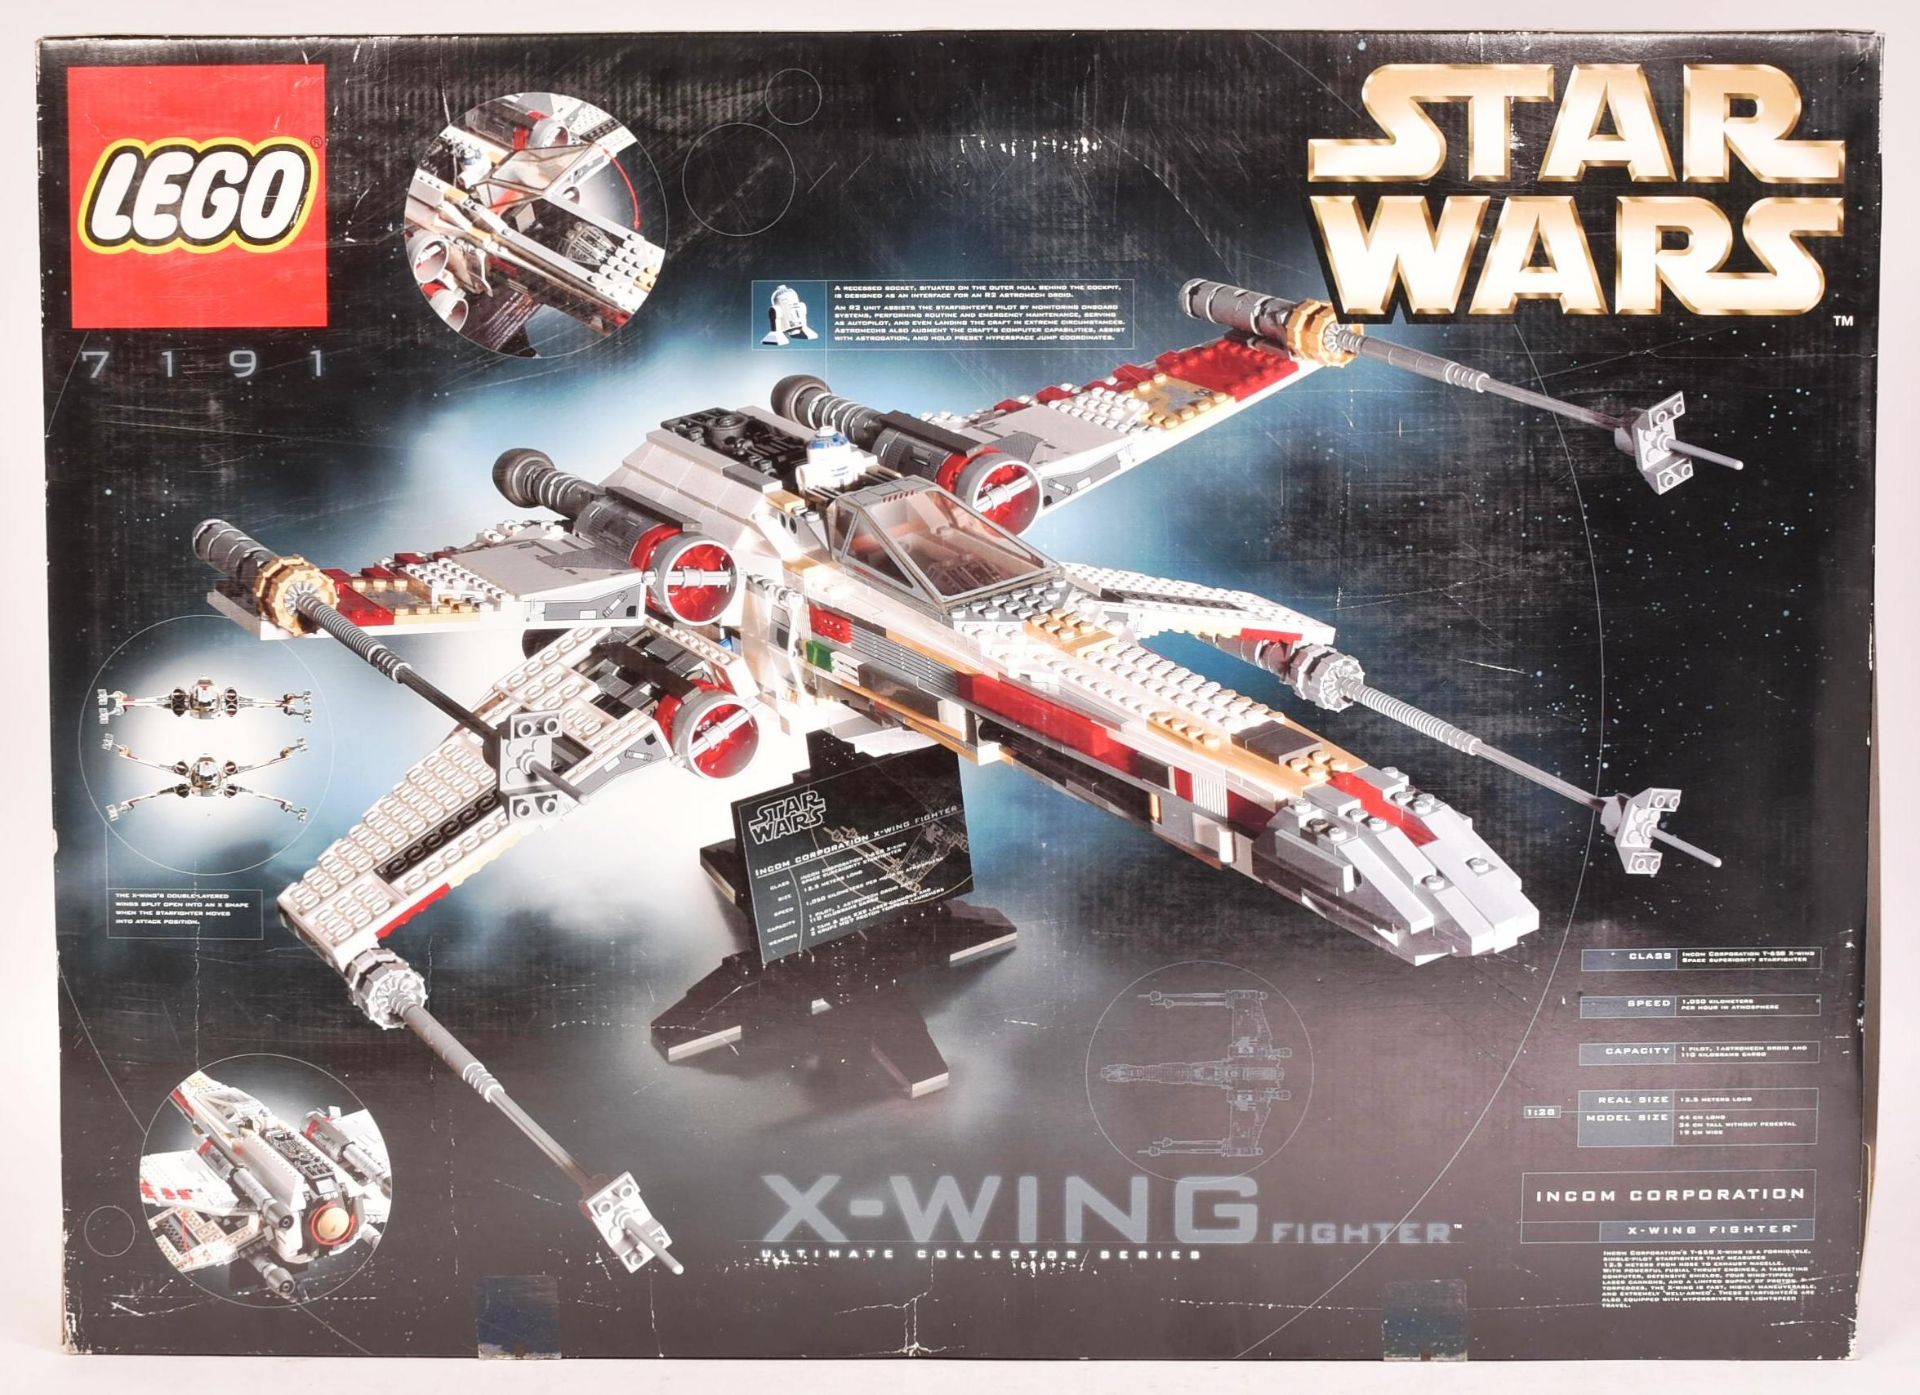 LEGO - STAR WARS - 7191 - X-WING FIGHTER - Image 2 of 6